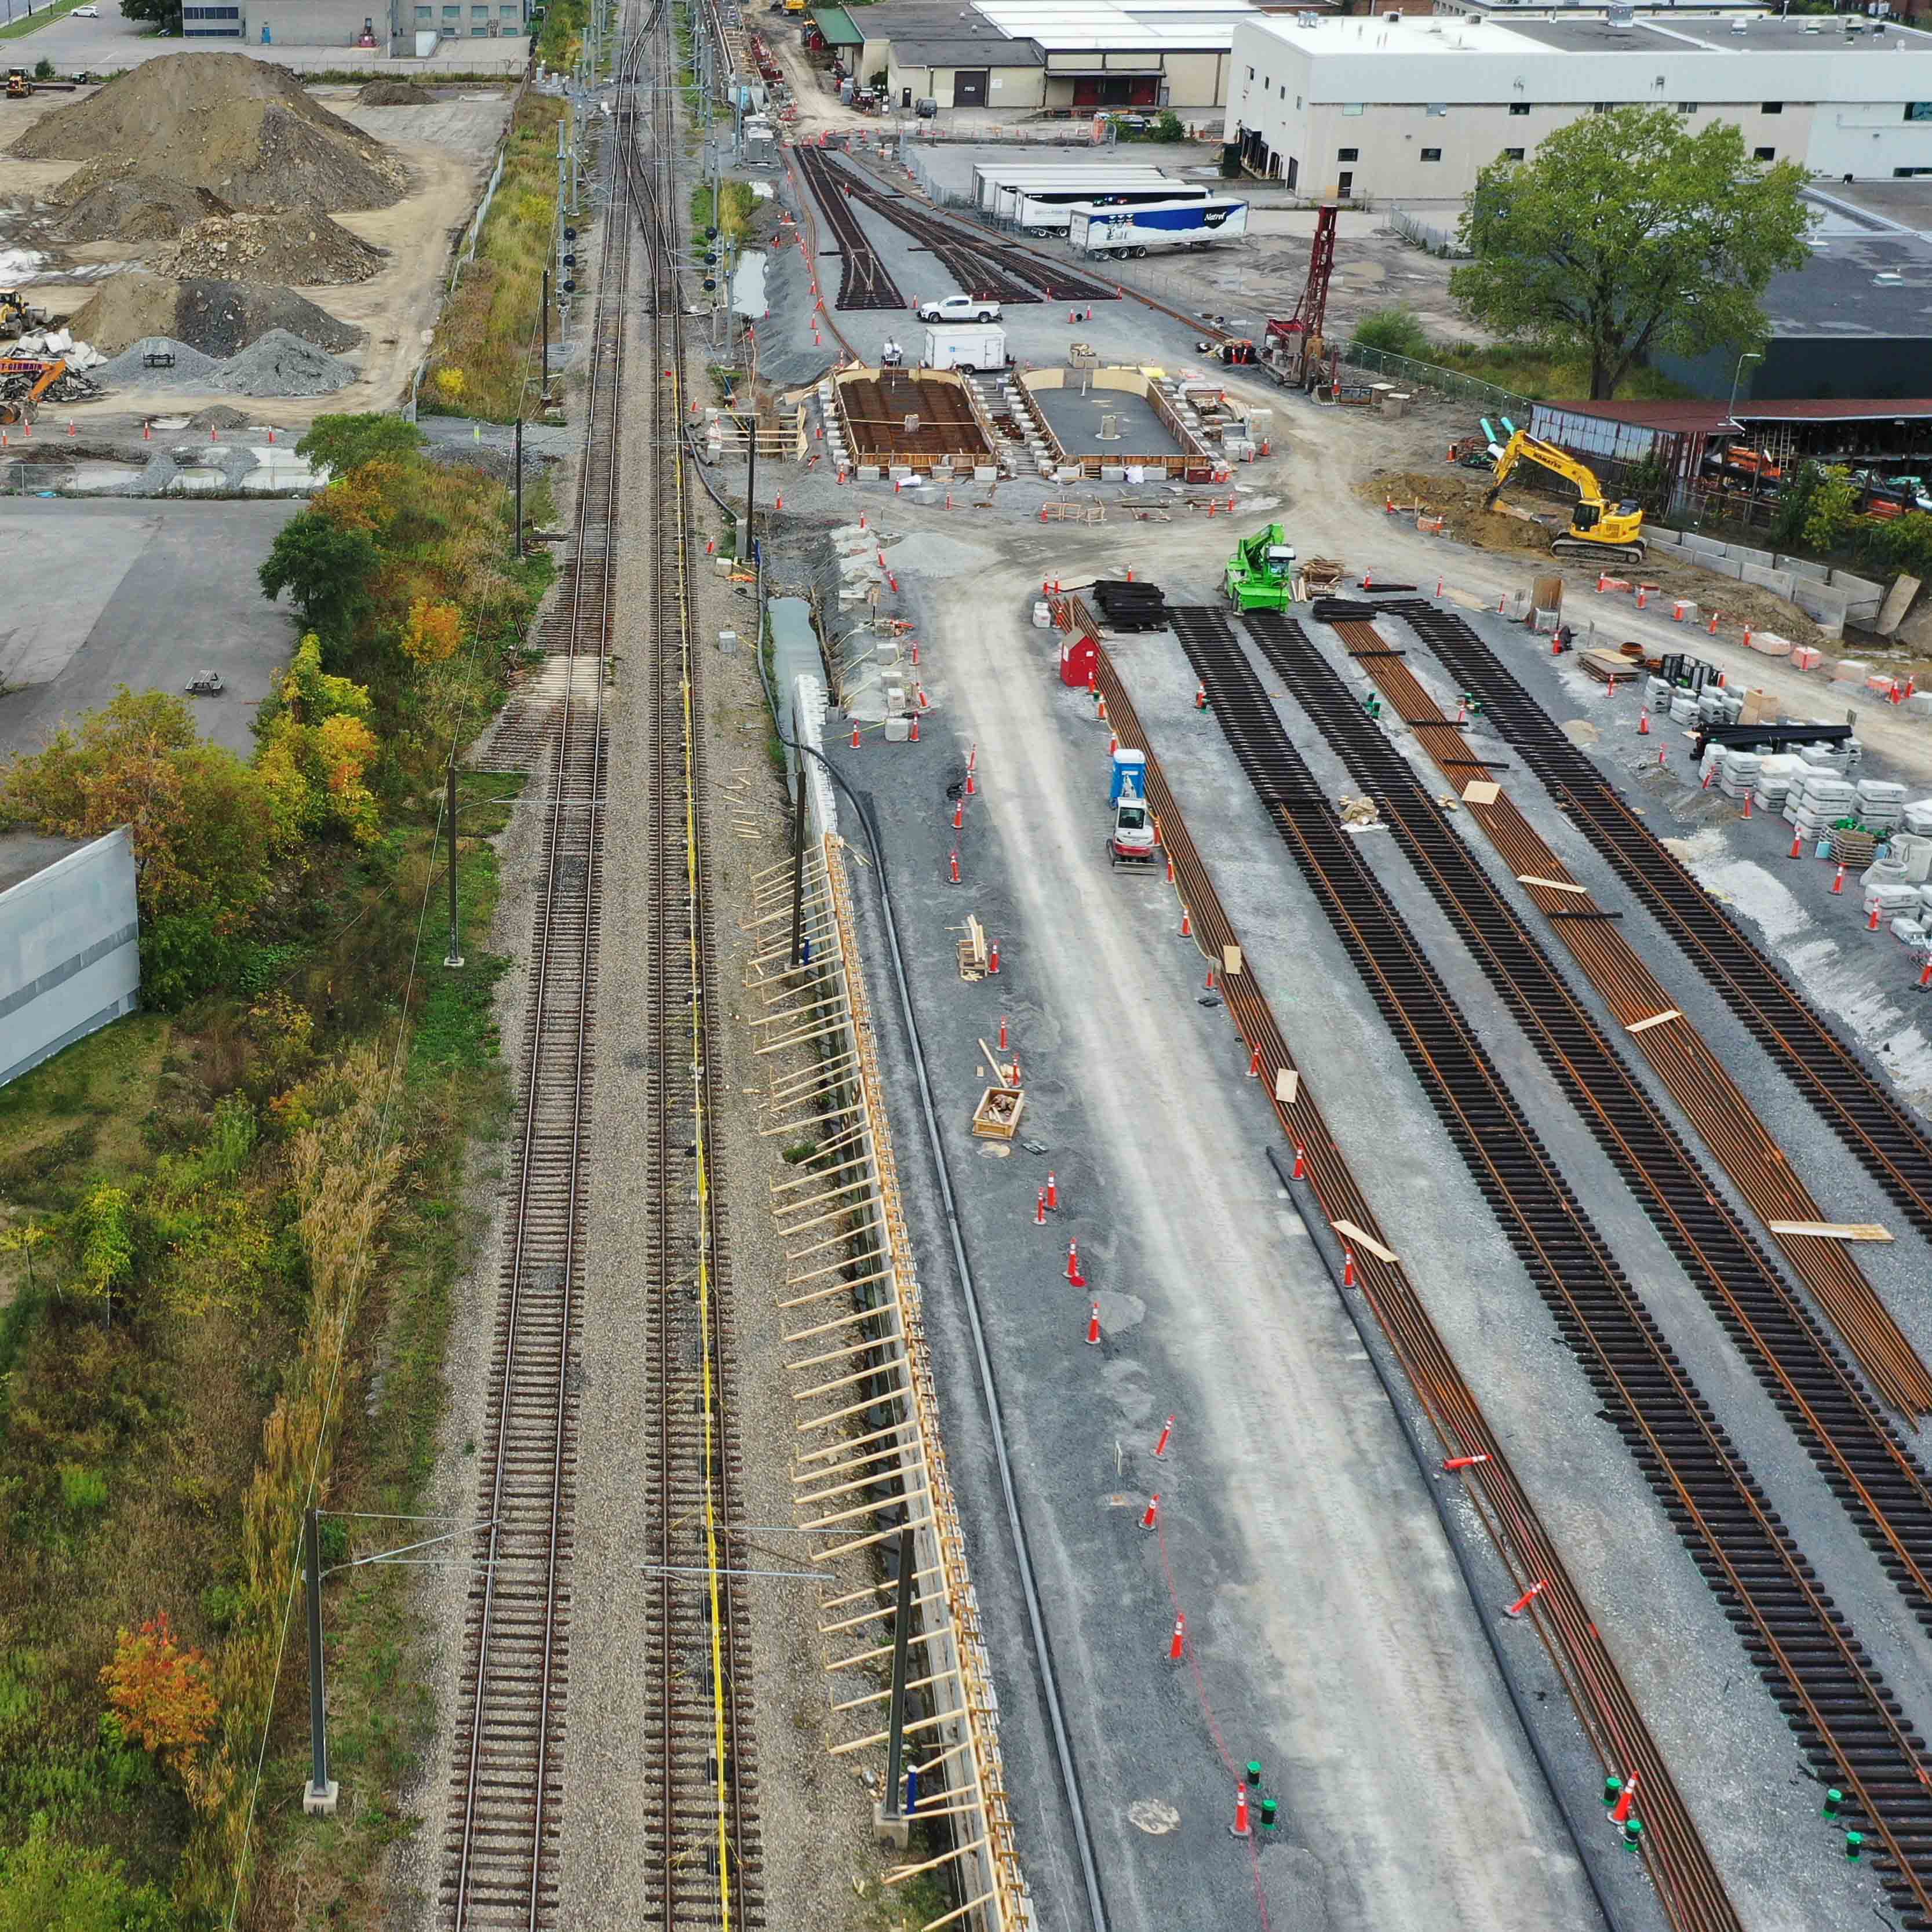 Progress of work on the site of the future Côte-de-Liesse station (November 2019)